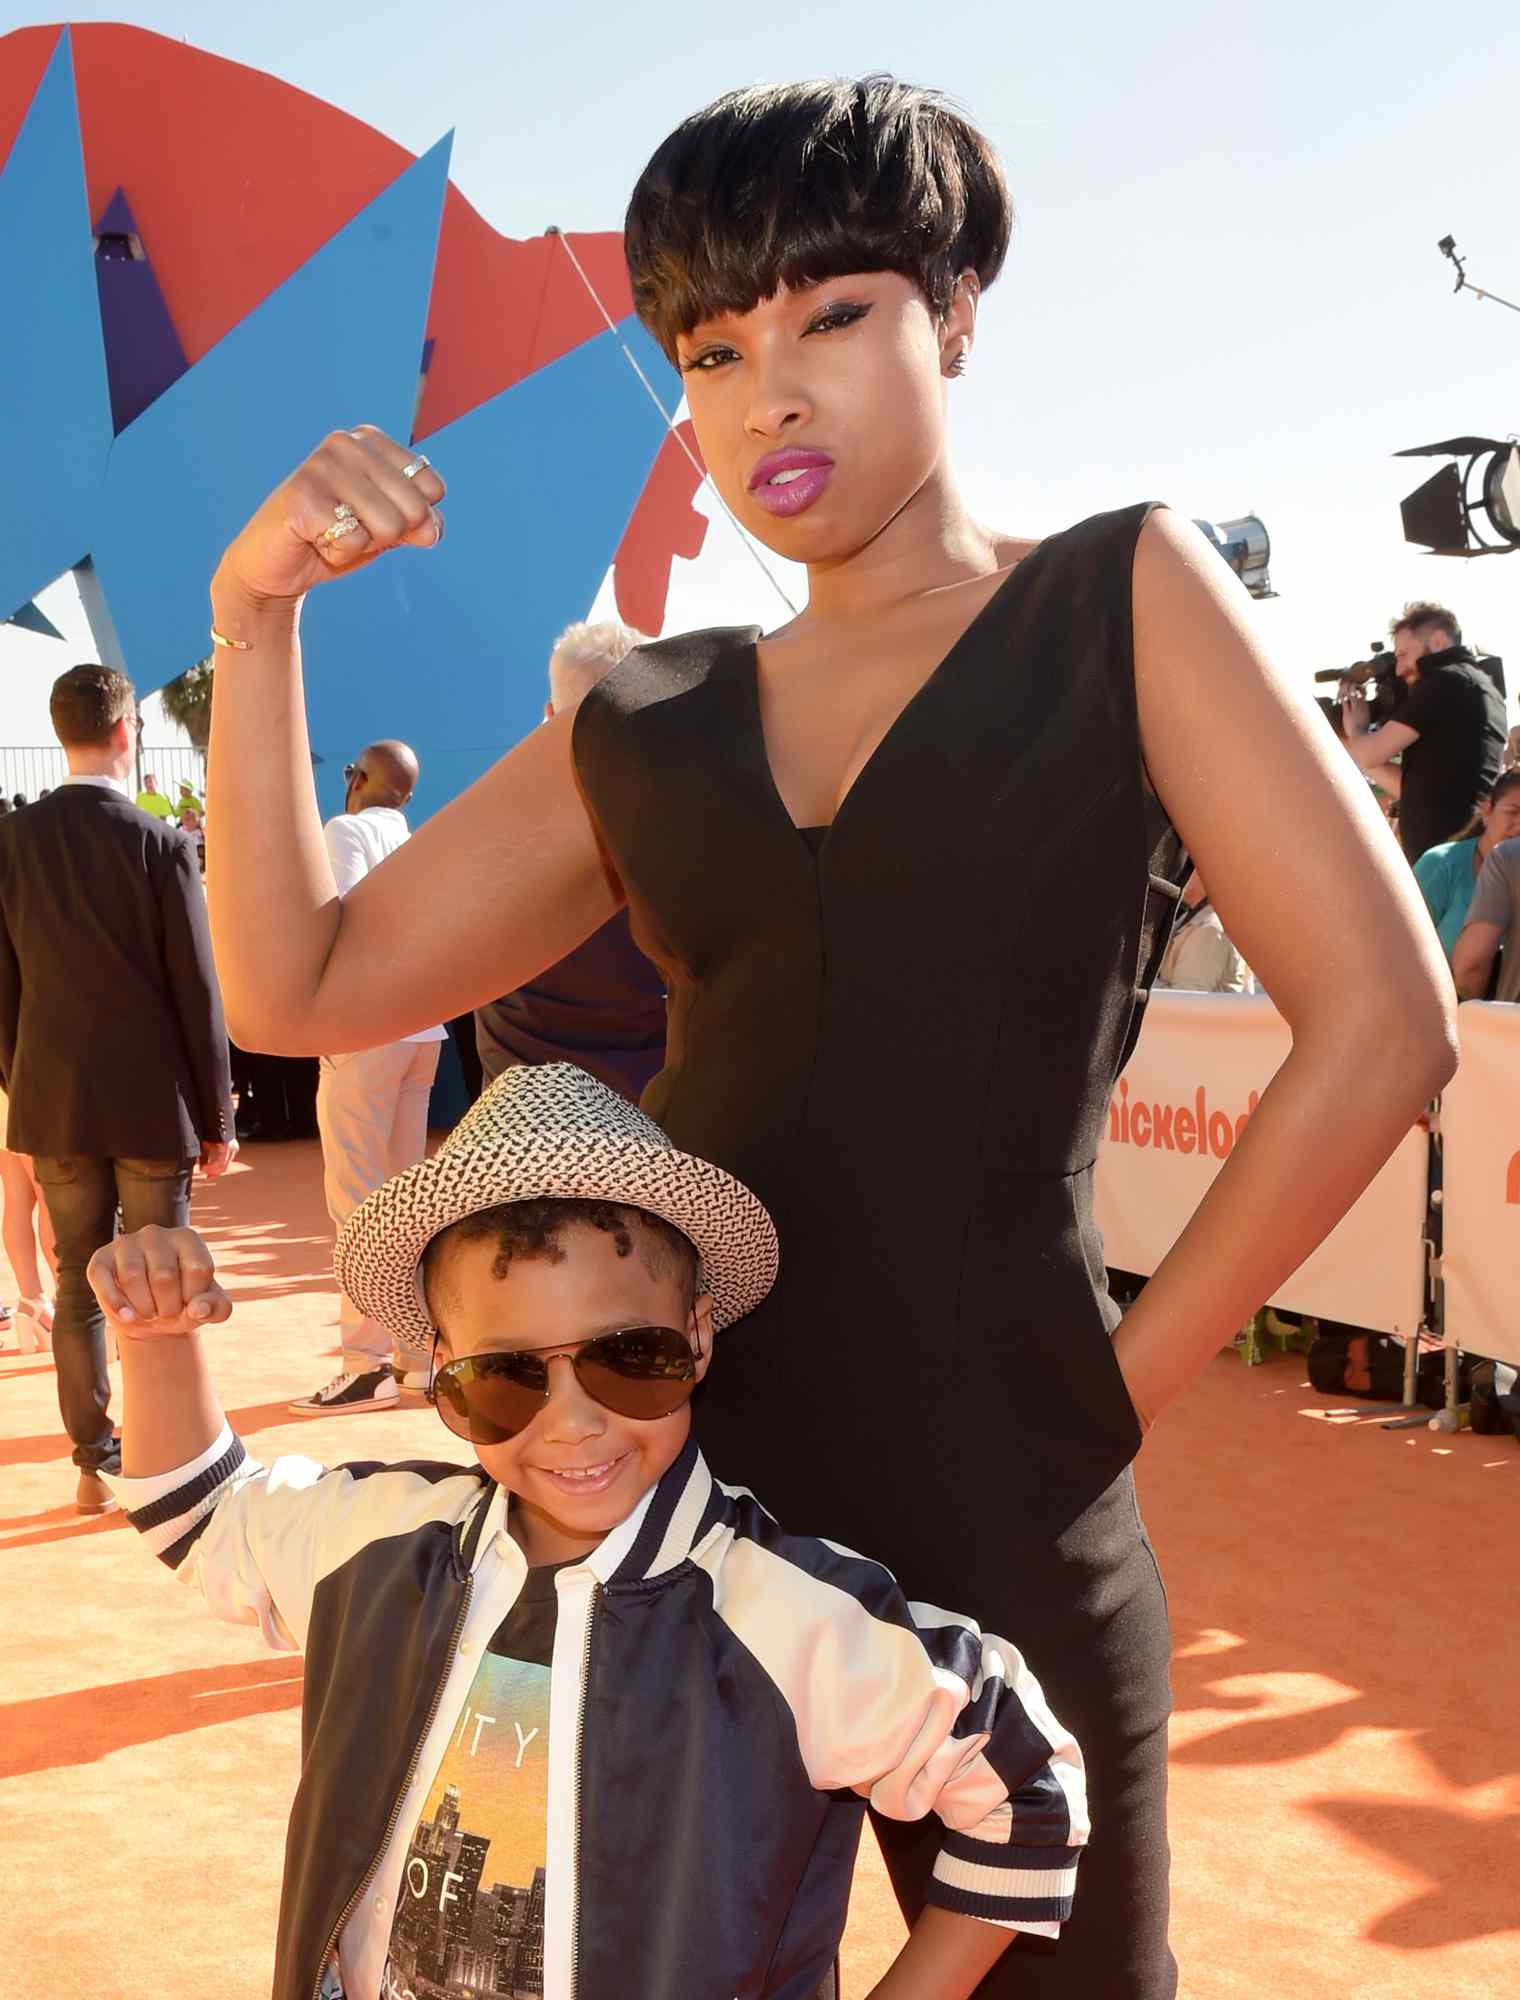 Jennifer Hudson (R) and David Daniel Otunga, Jr. attend Nickelodeon's 28th Annual Kids' Choice Awards held at The Forum on March 28, 2015 in Inglewood, California